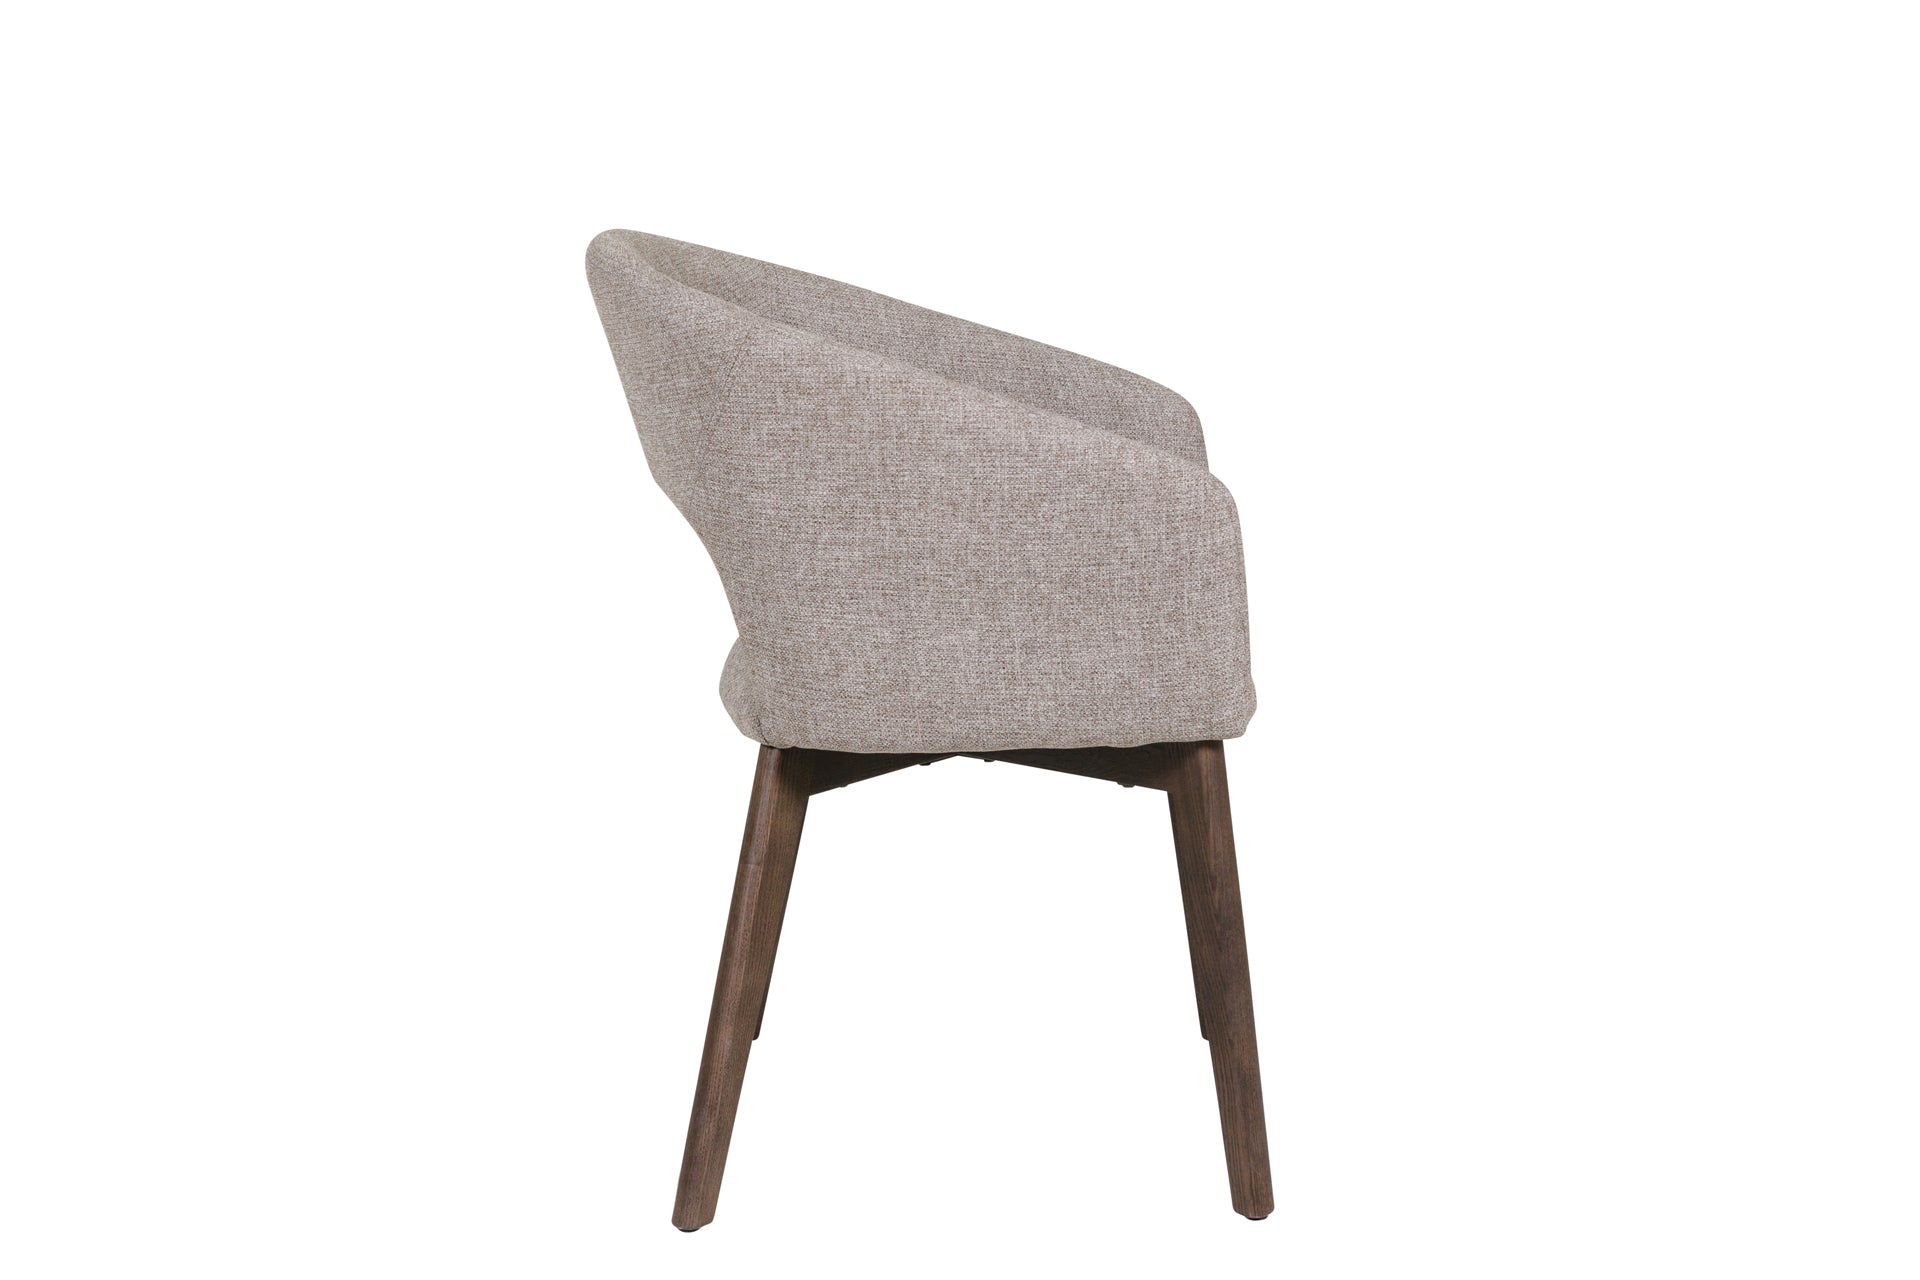 Everest Dining Chairs - Latte